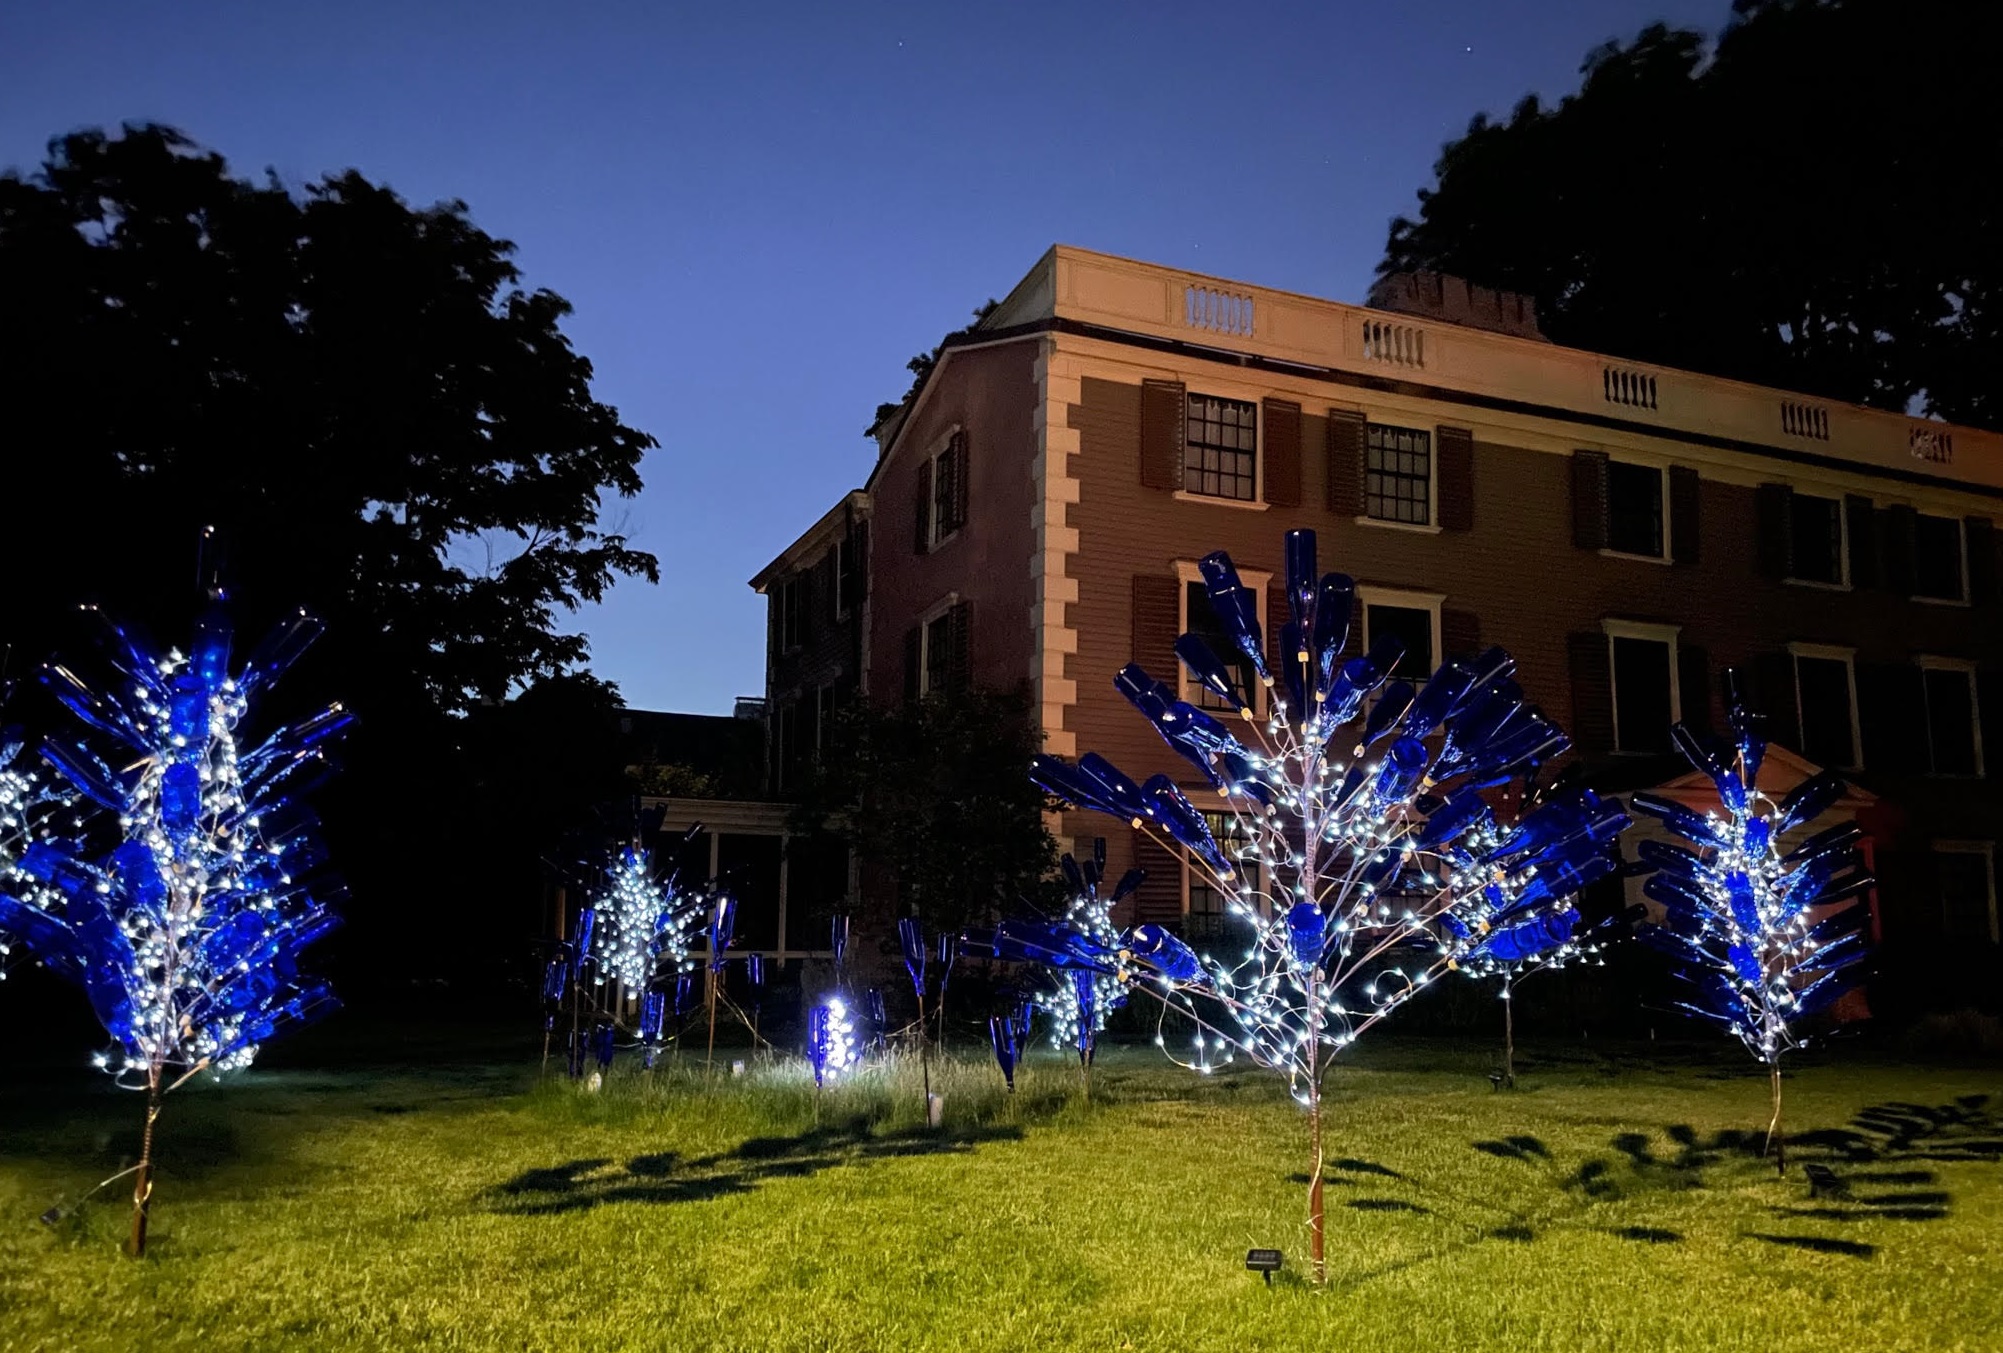 Lit up bottle tree grove with blue bottles against a twilight blue sky, with a building in the background